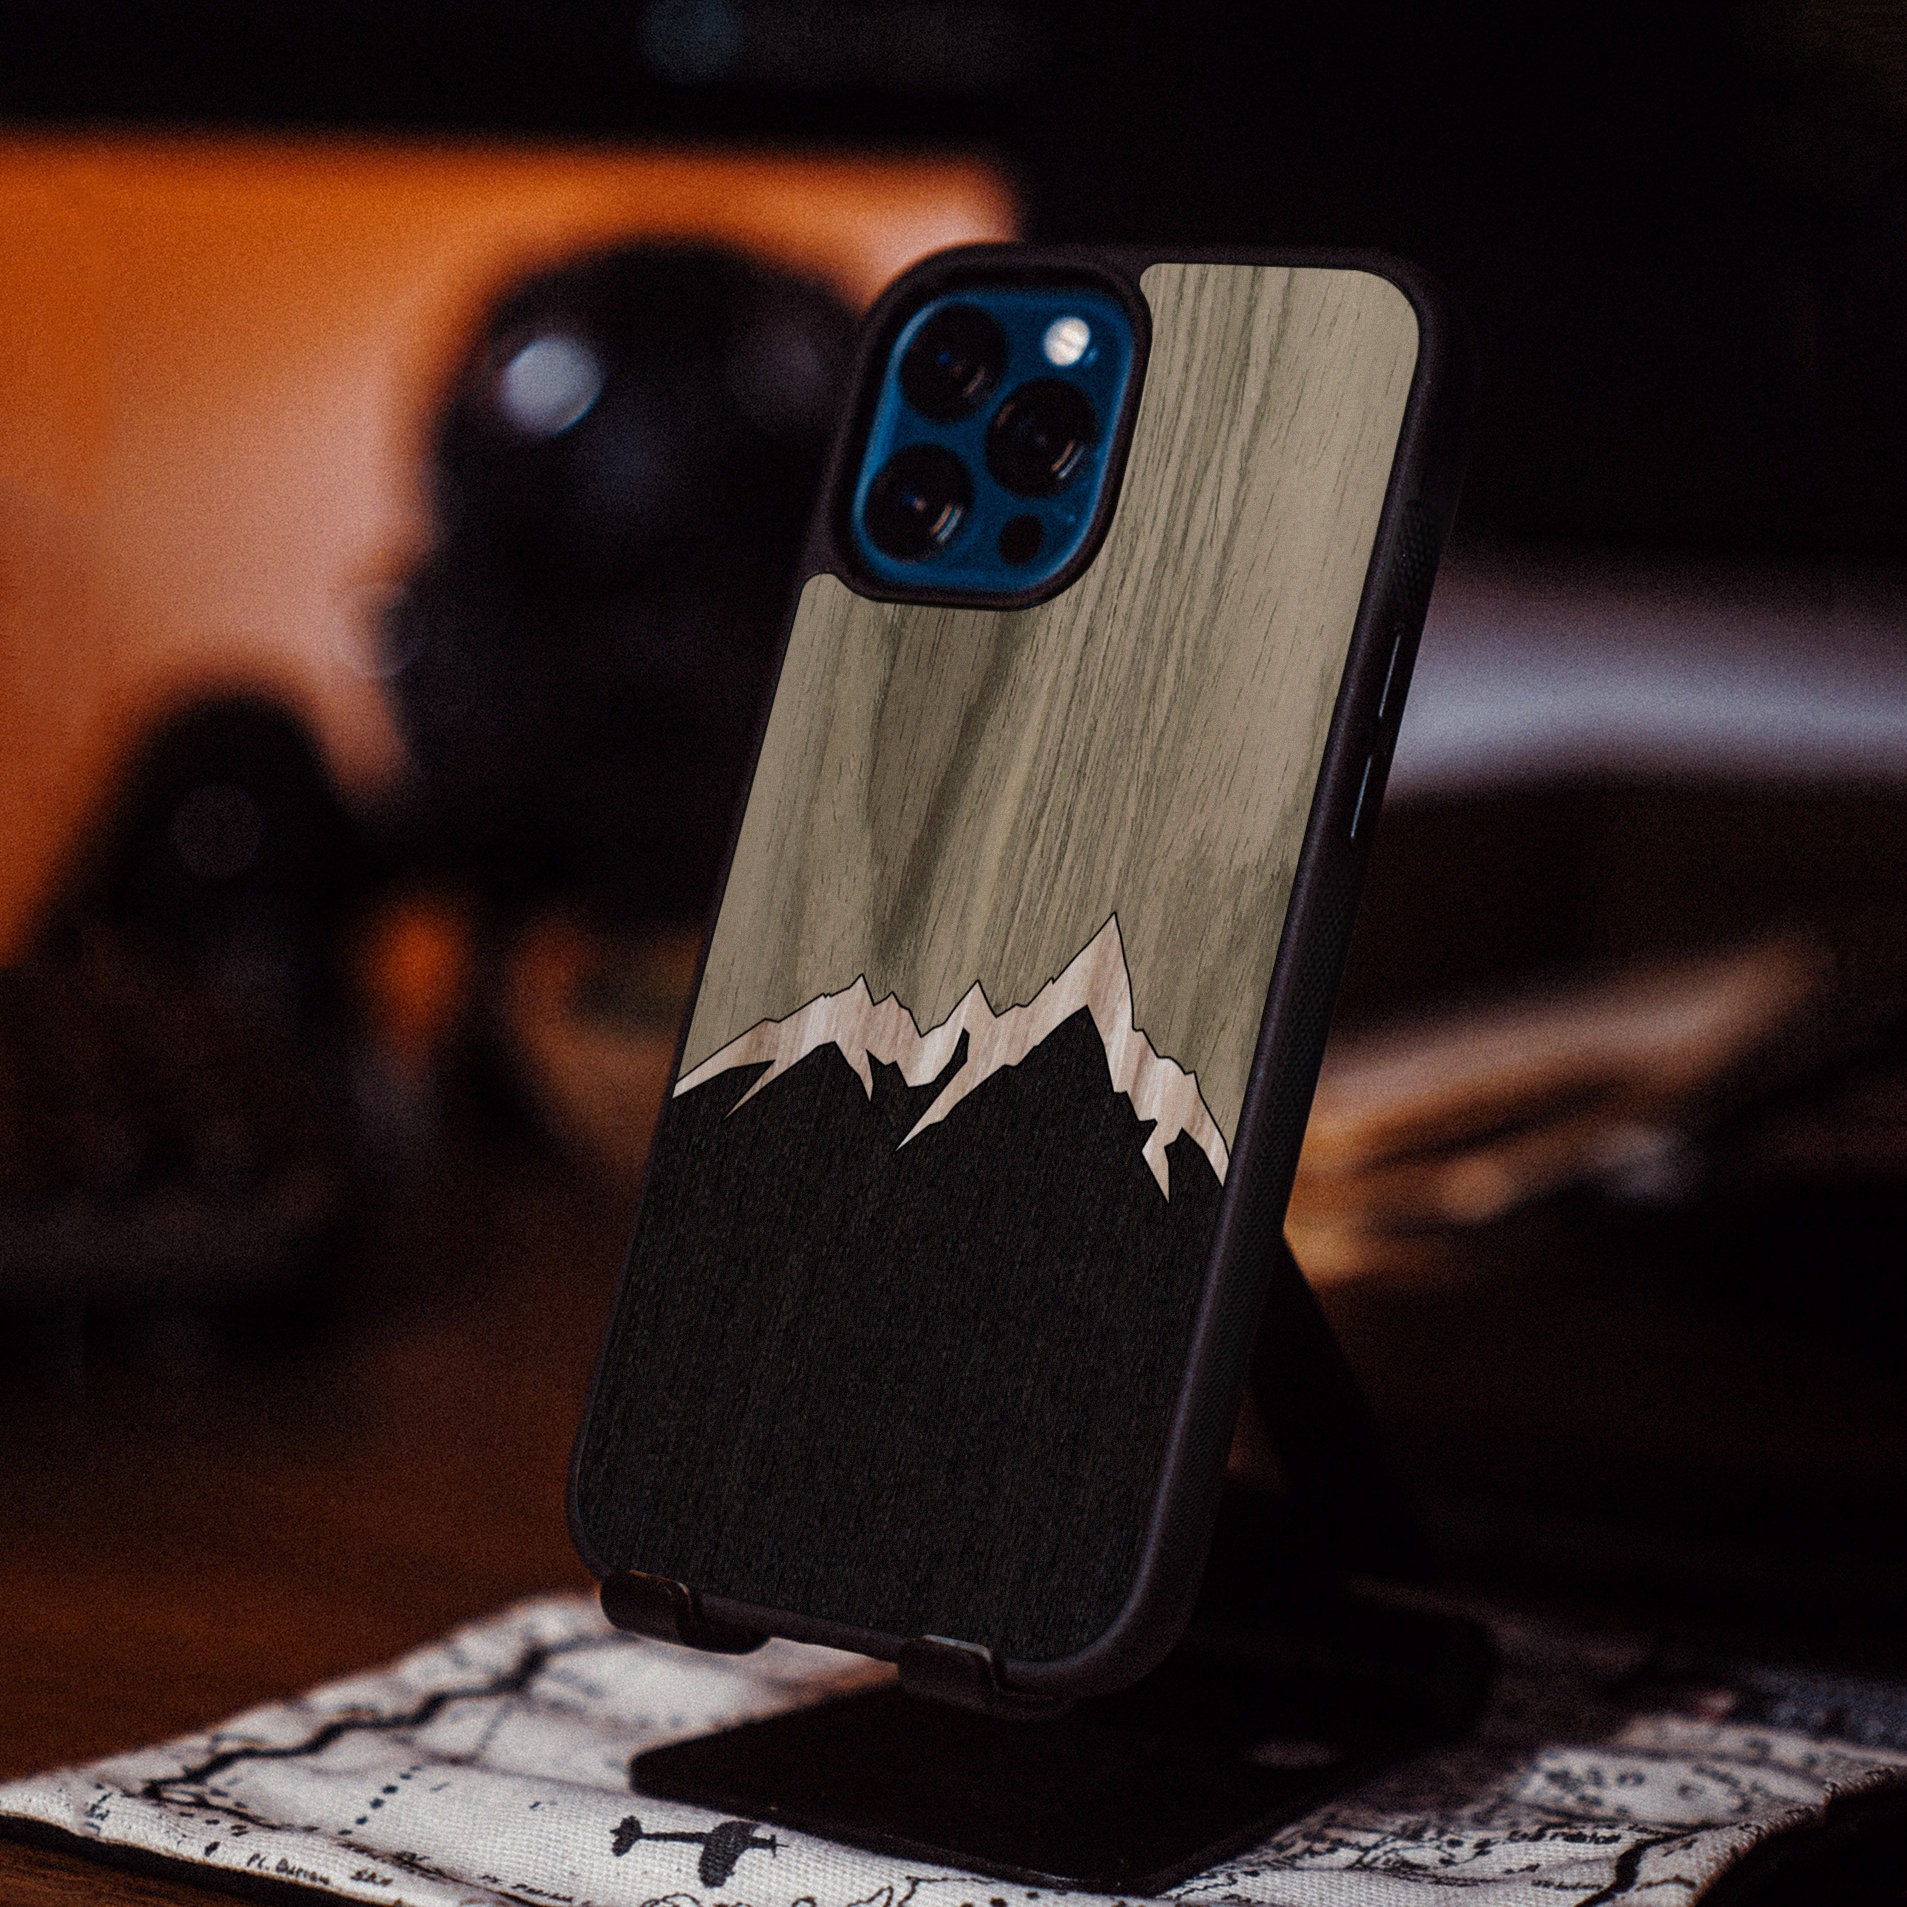 Mous Bamboo case is the best case I have ever bought. durable